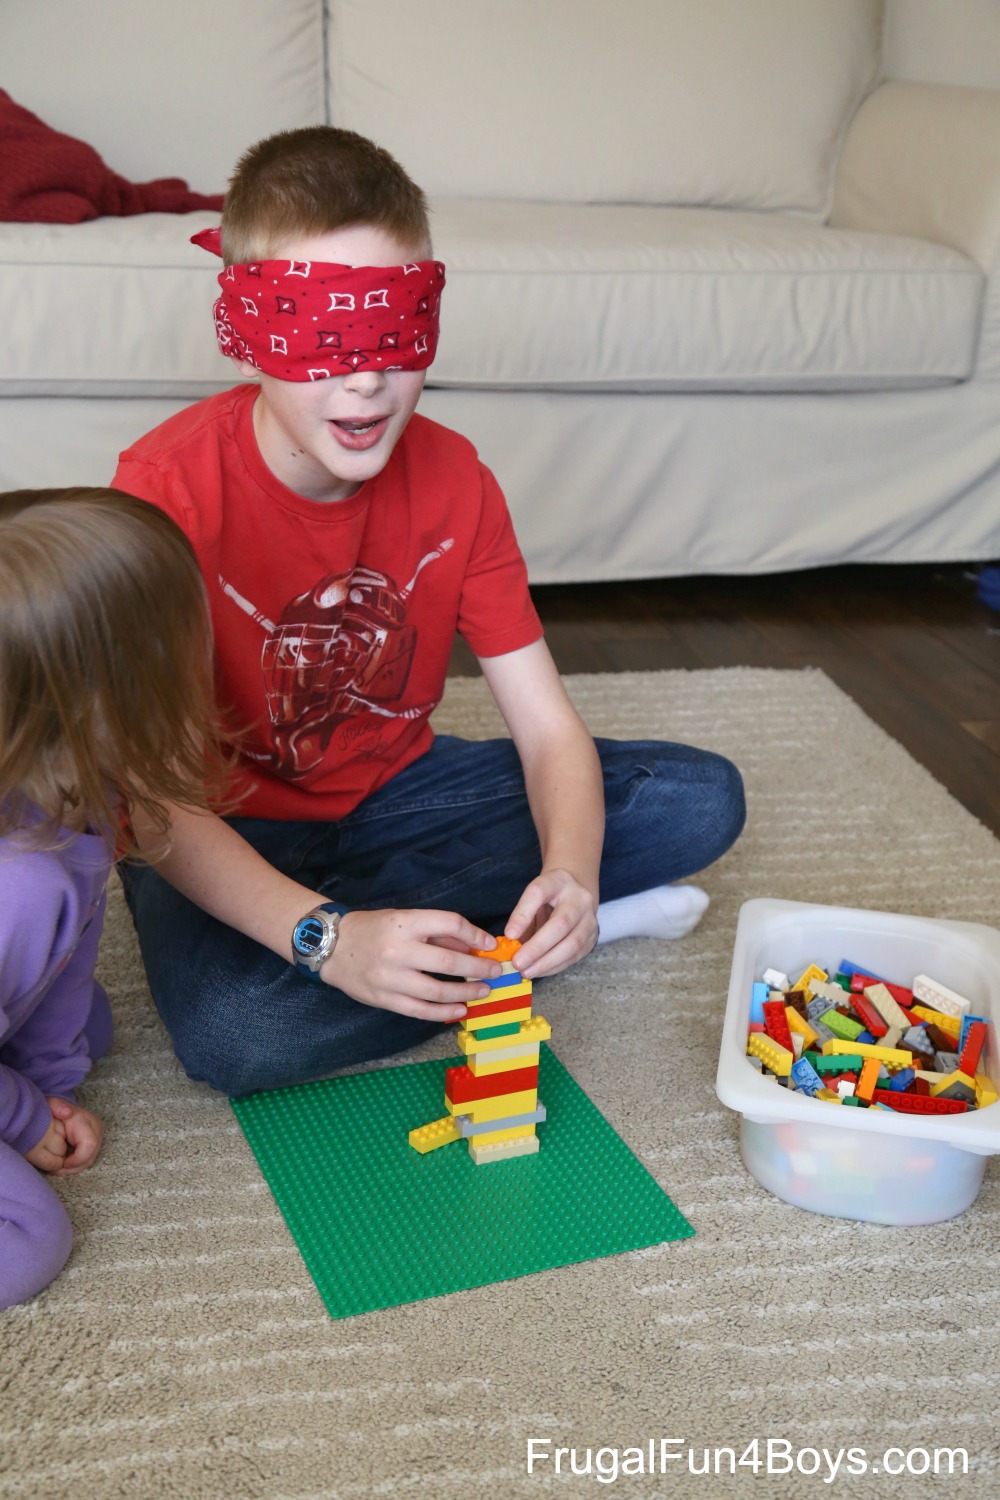 10+ Awesome LEGO Party Games